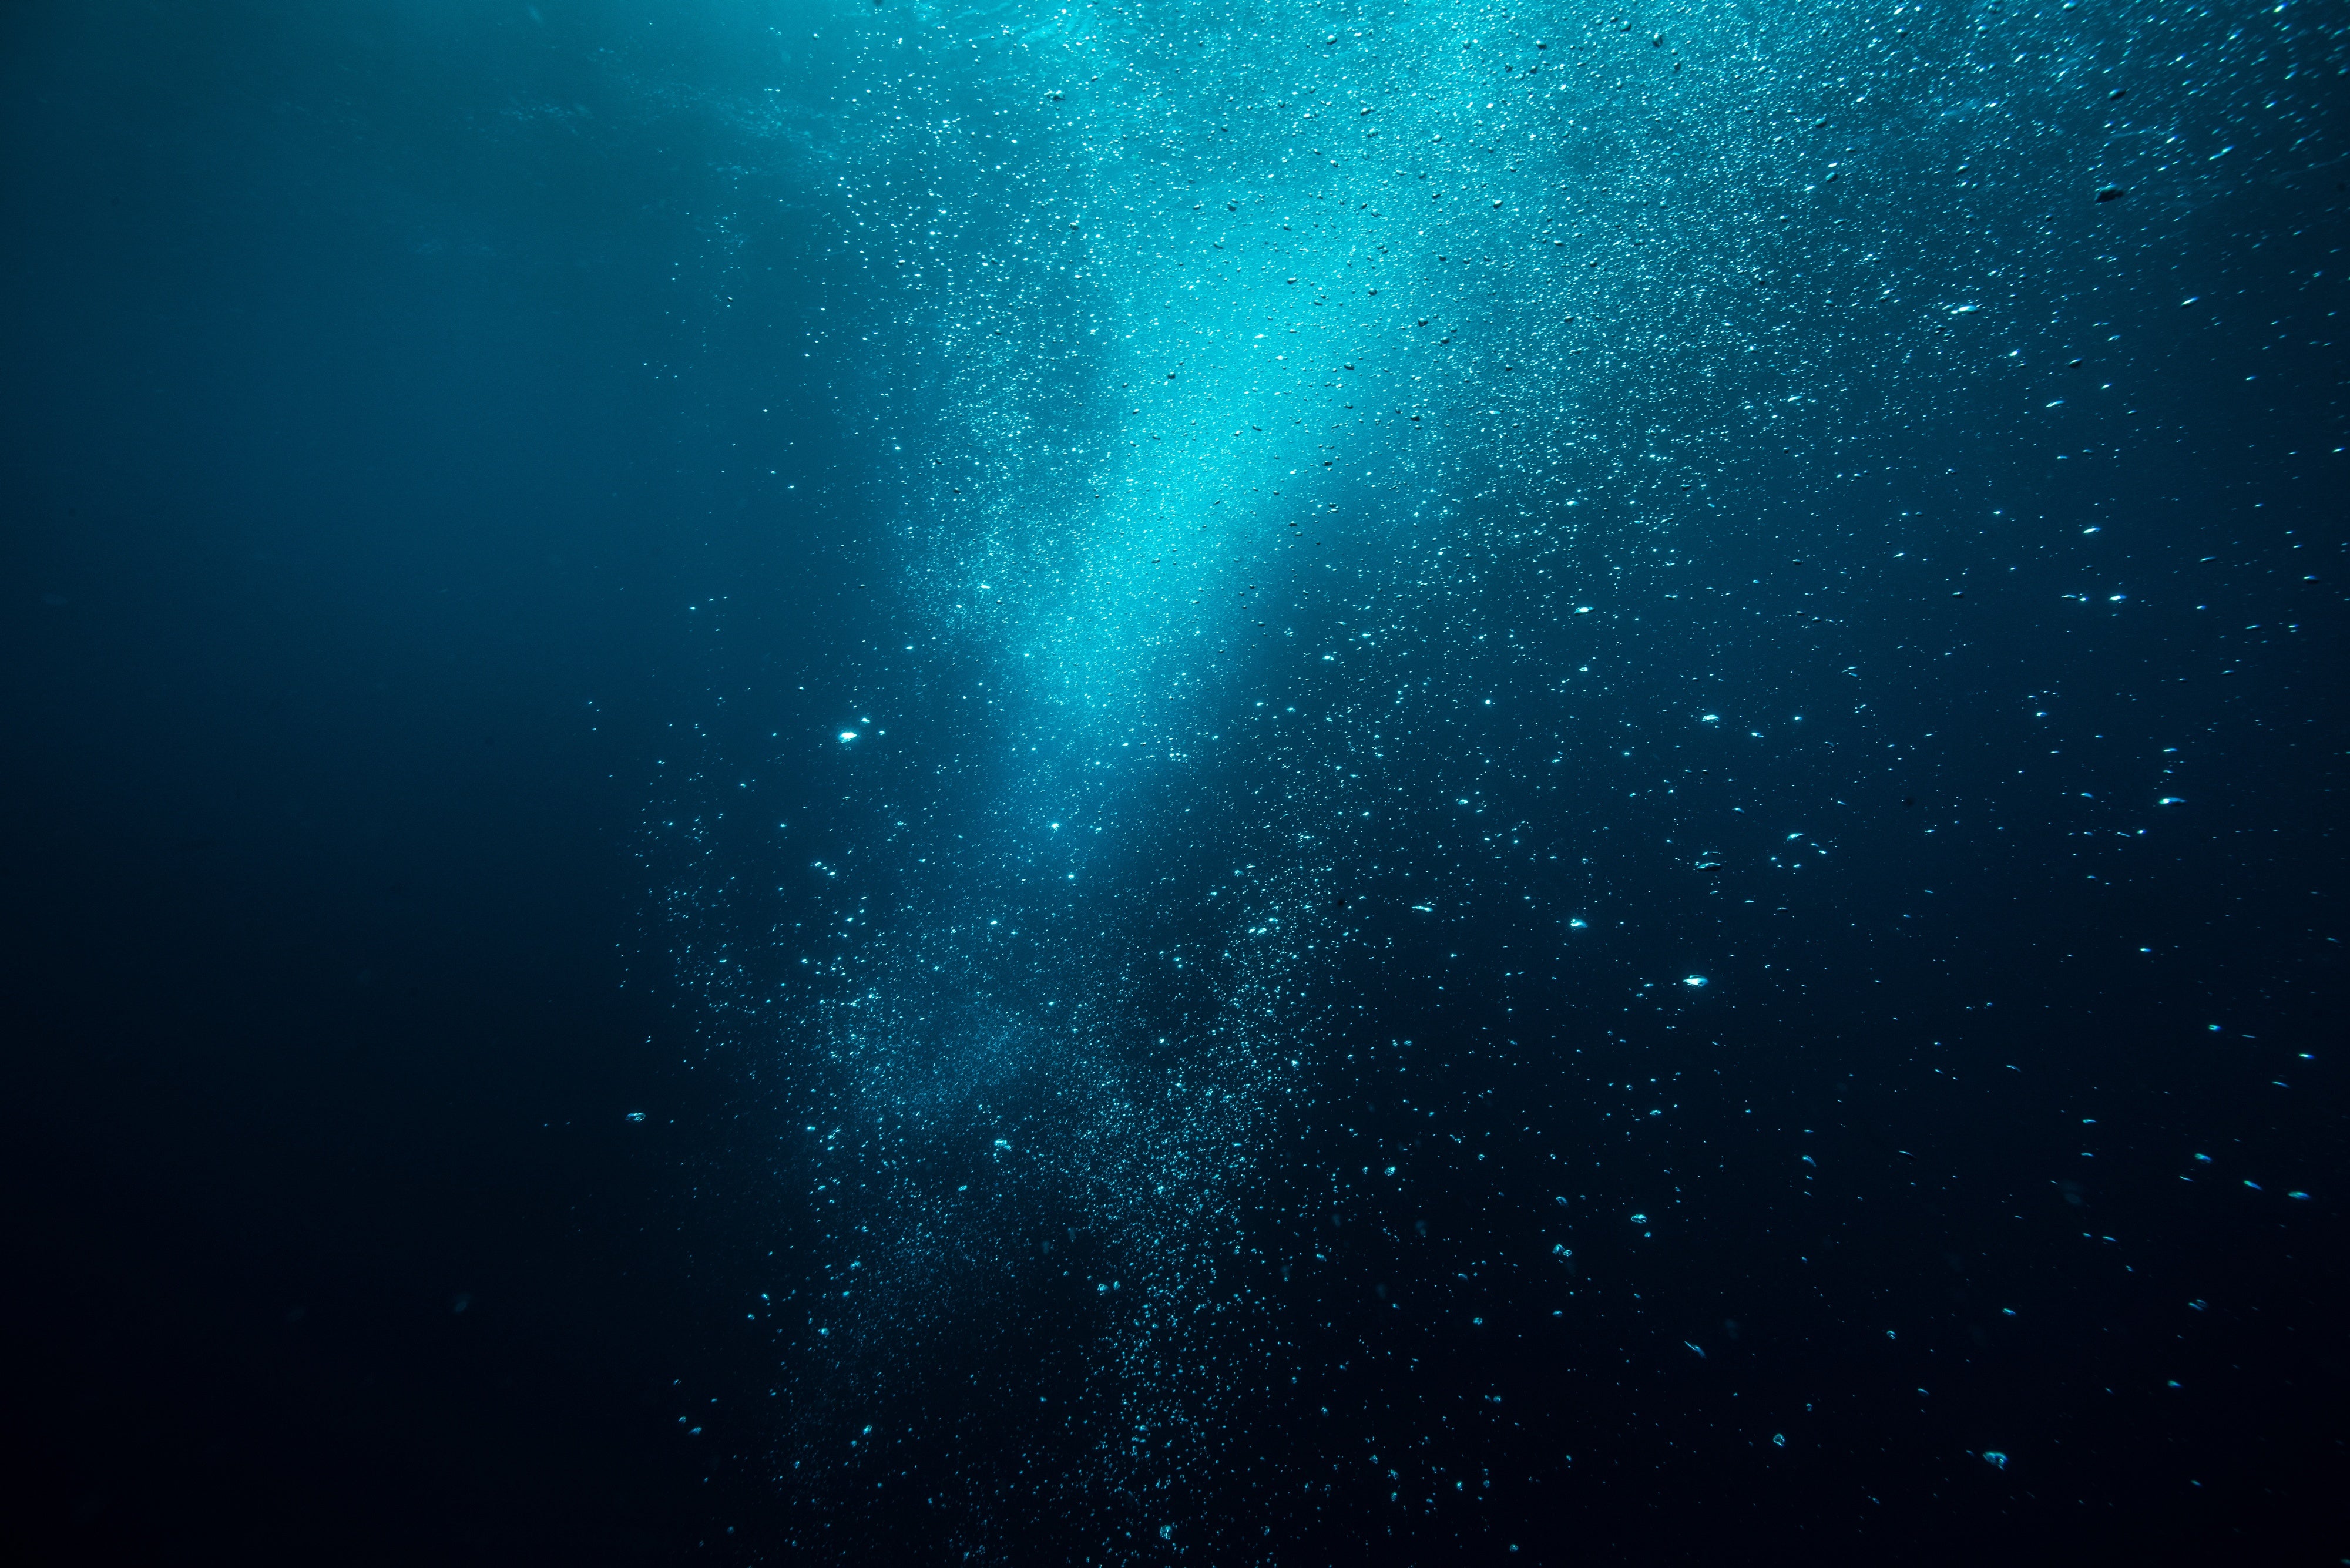 Melting Ice Could Mess Up Deep-Sea Chemistry - Scientific American